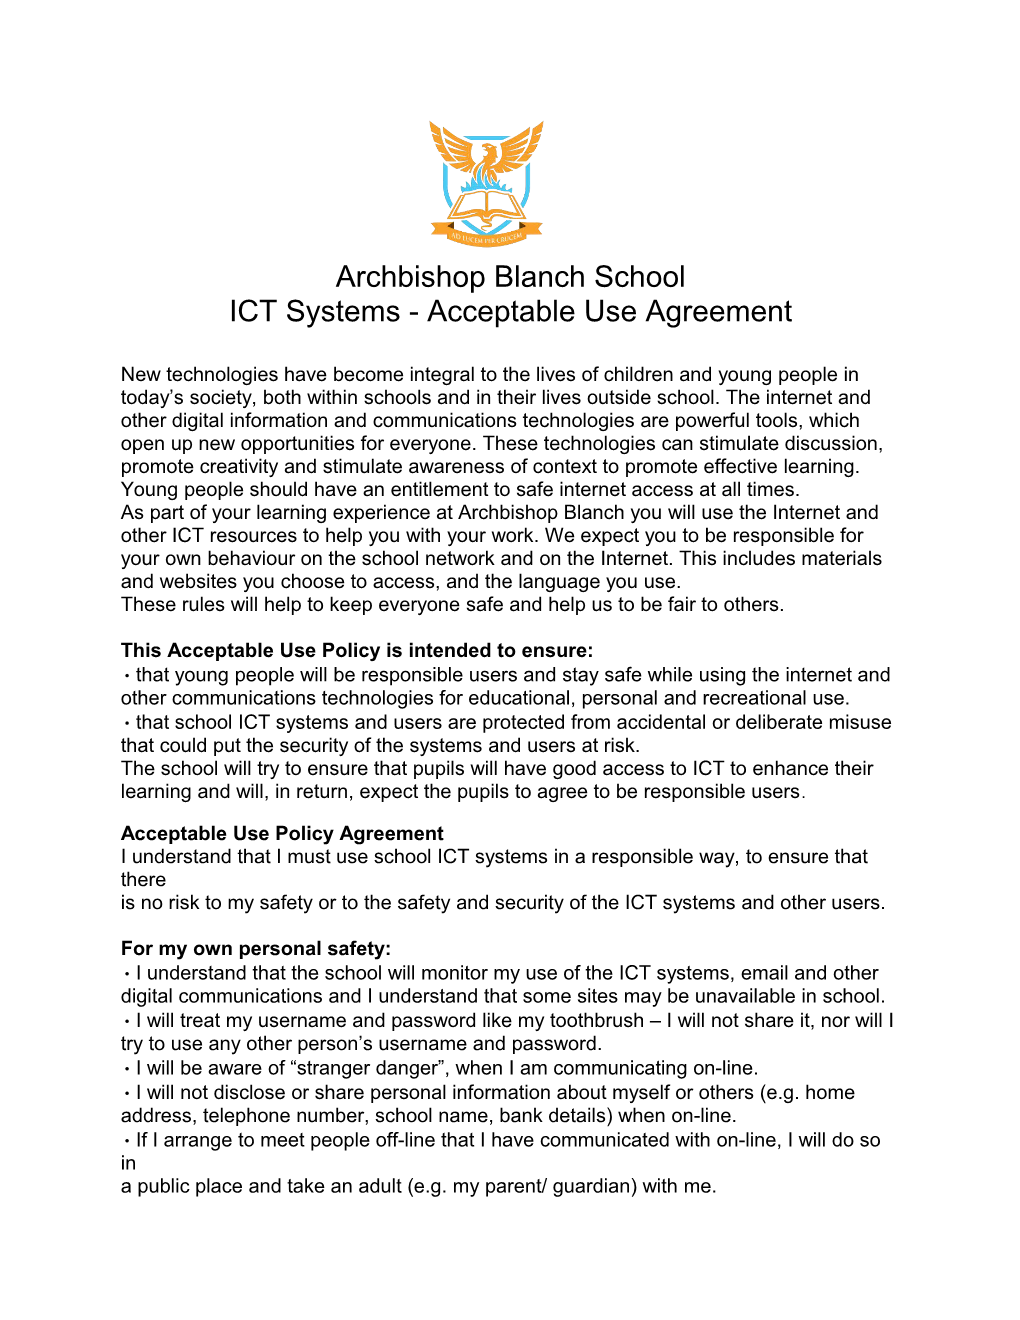 ICT Systems - Acceptable Use Agreement